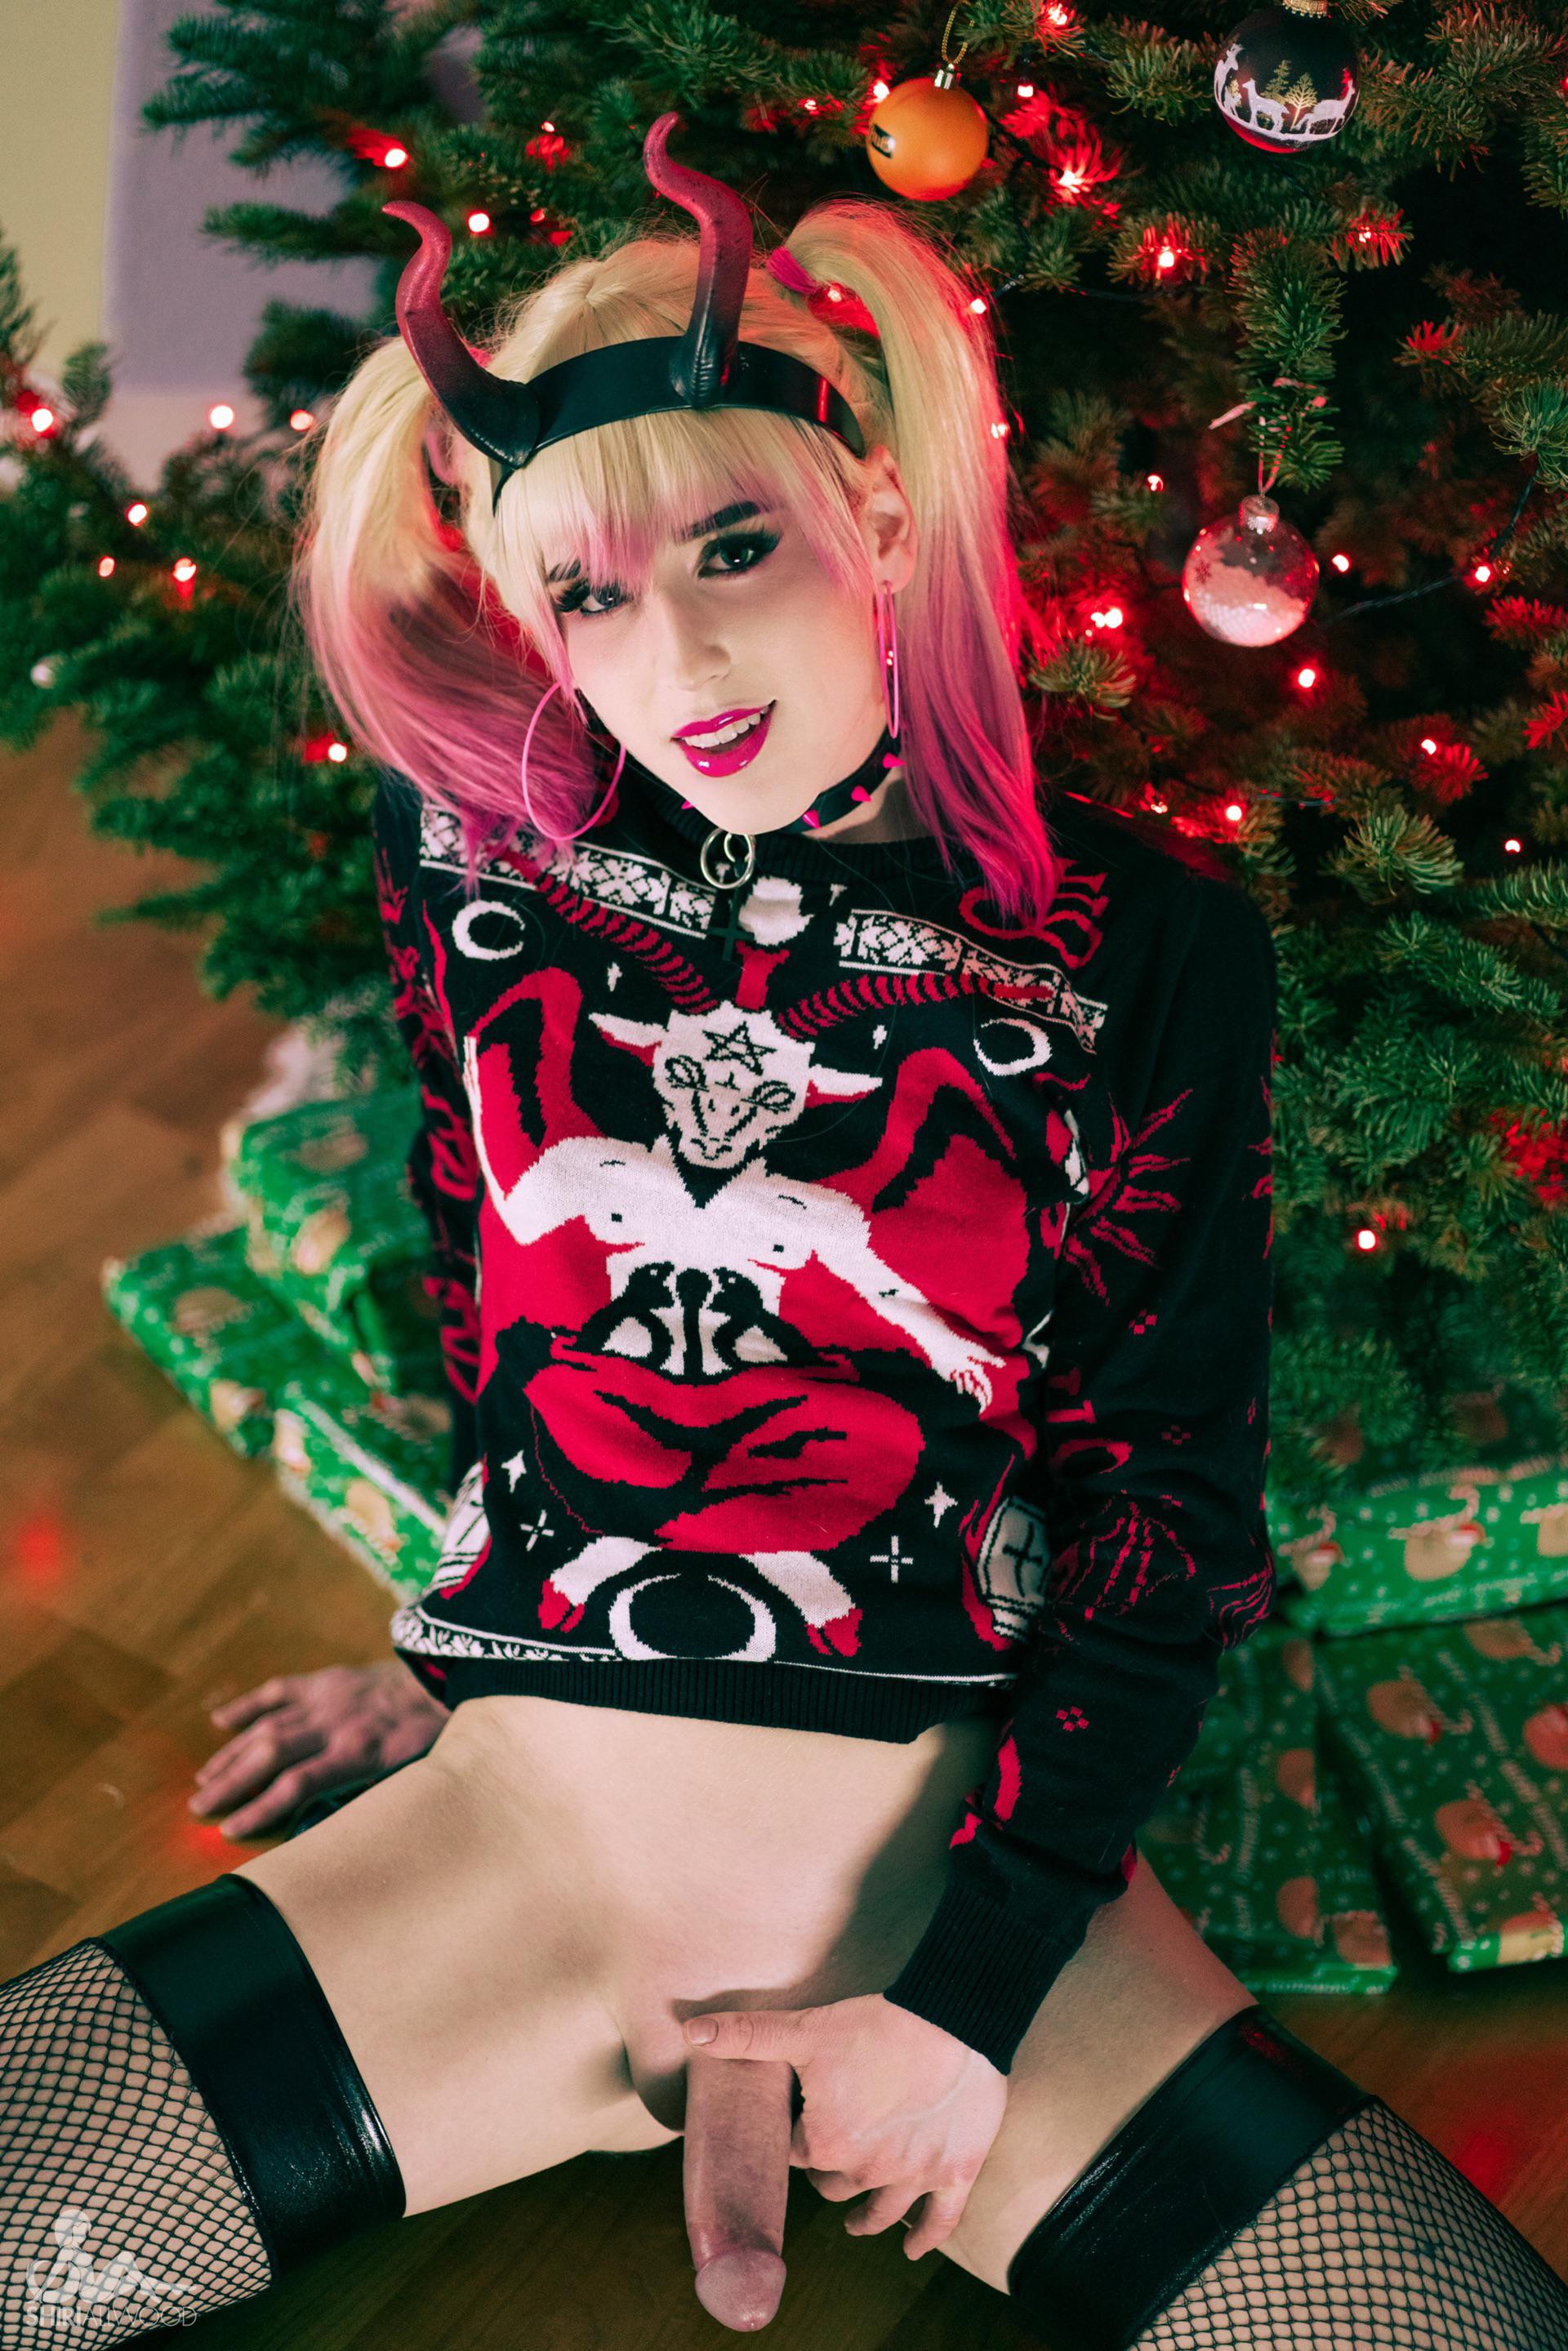 Waiting under your tree 😈 zv611v - transexual woman